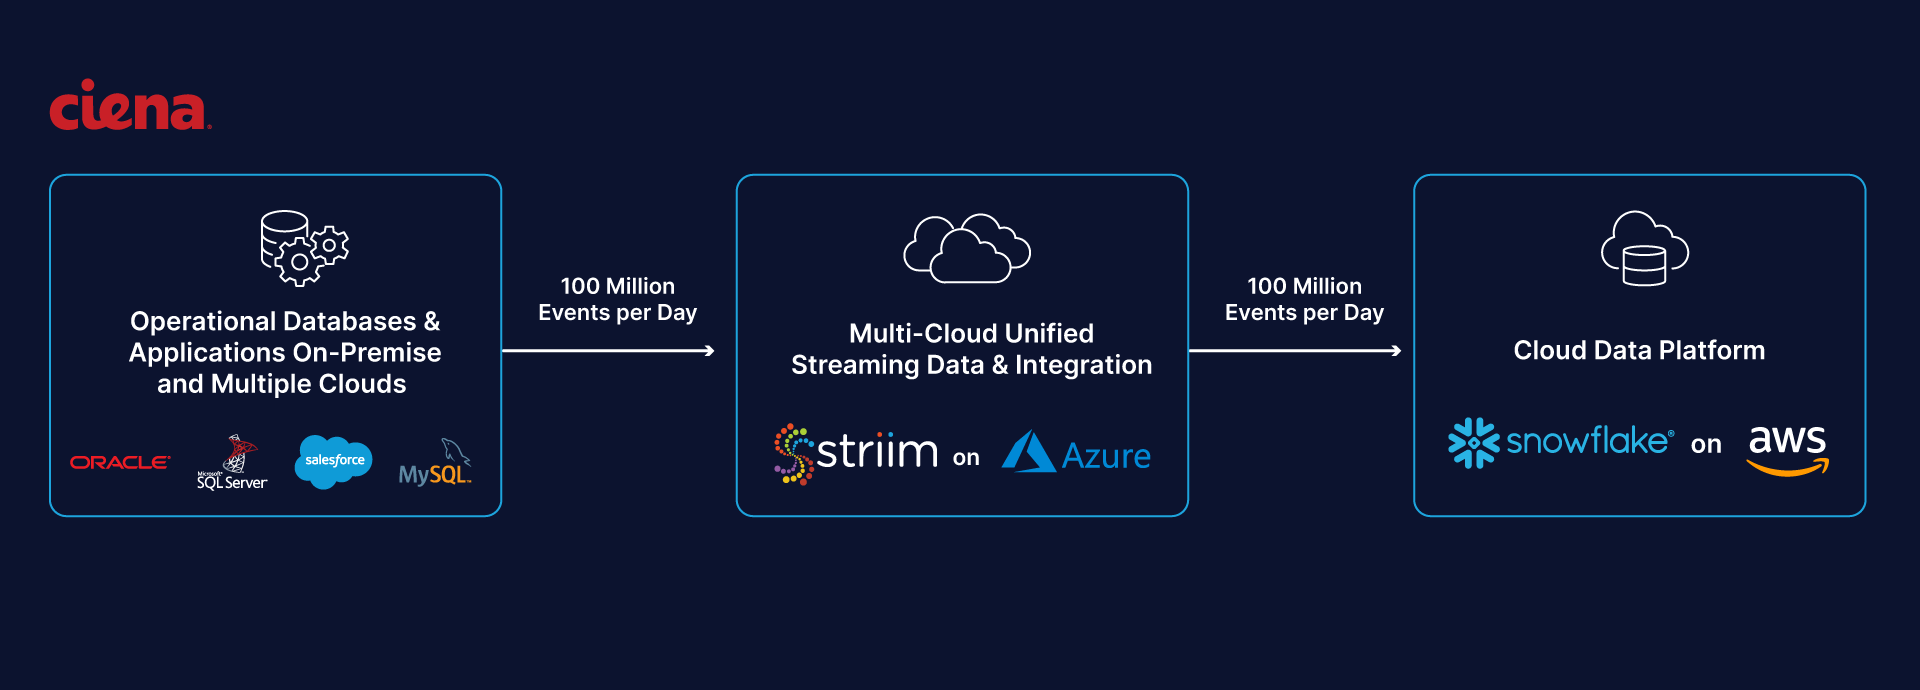 Striim enables real-time analytics for Ciena